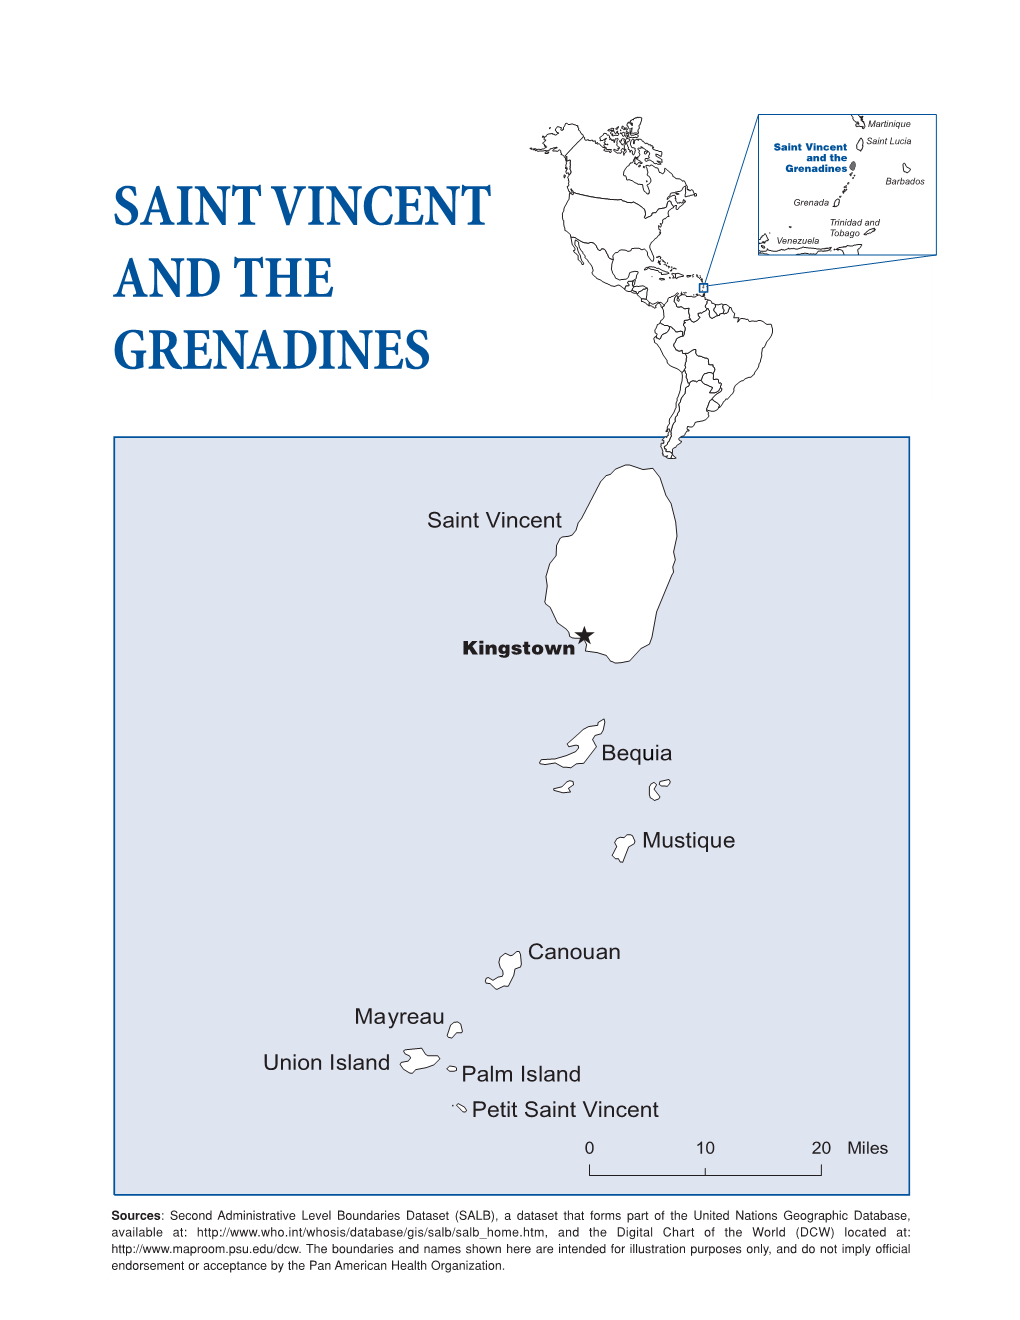 Saint Vincent and the Grenadines Barbados